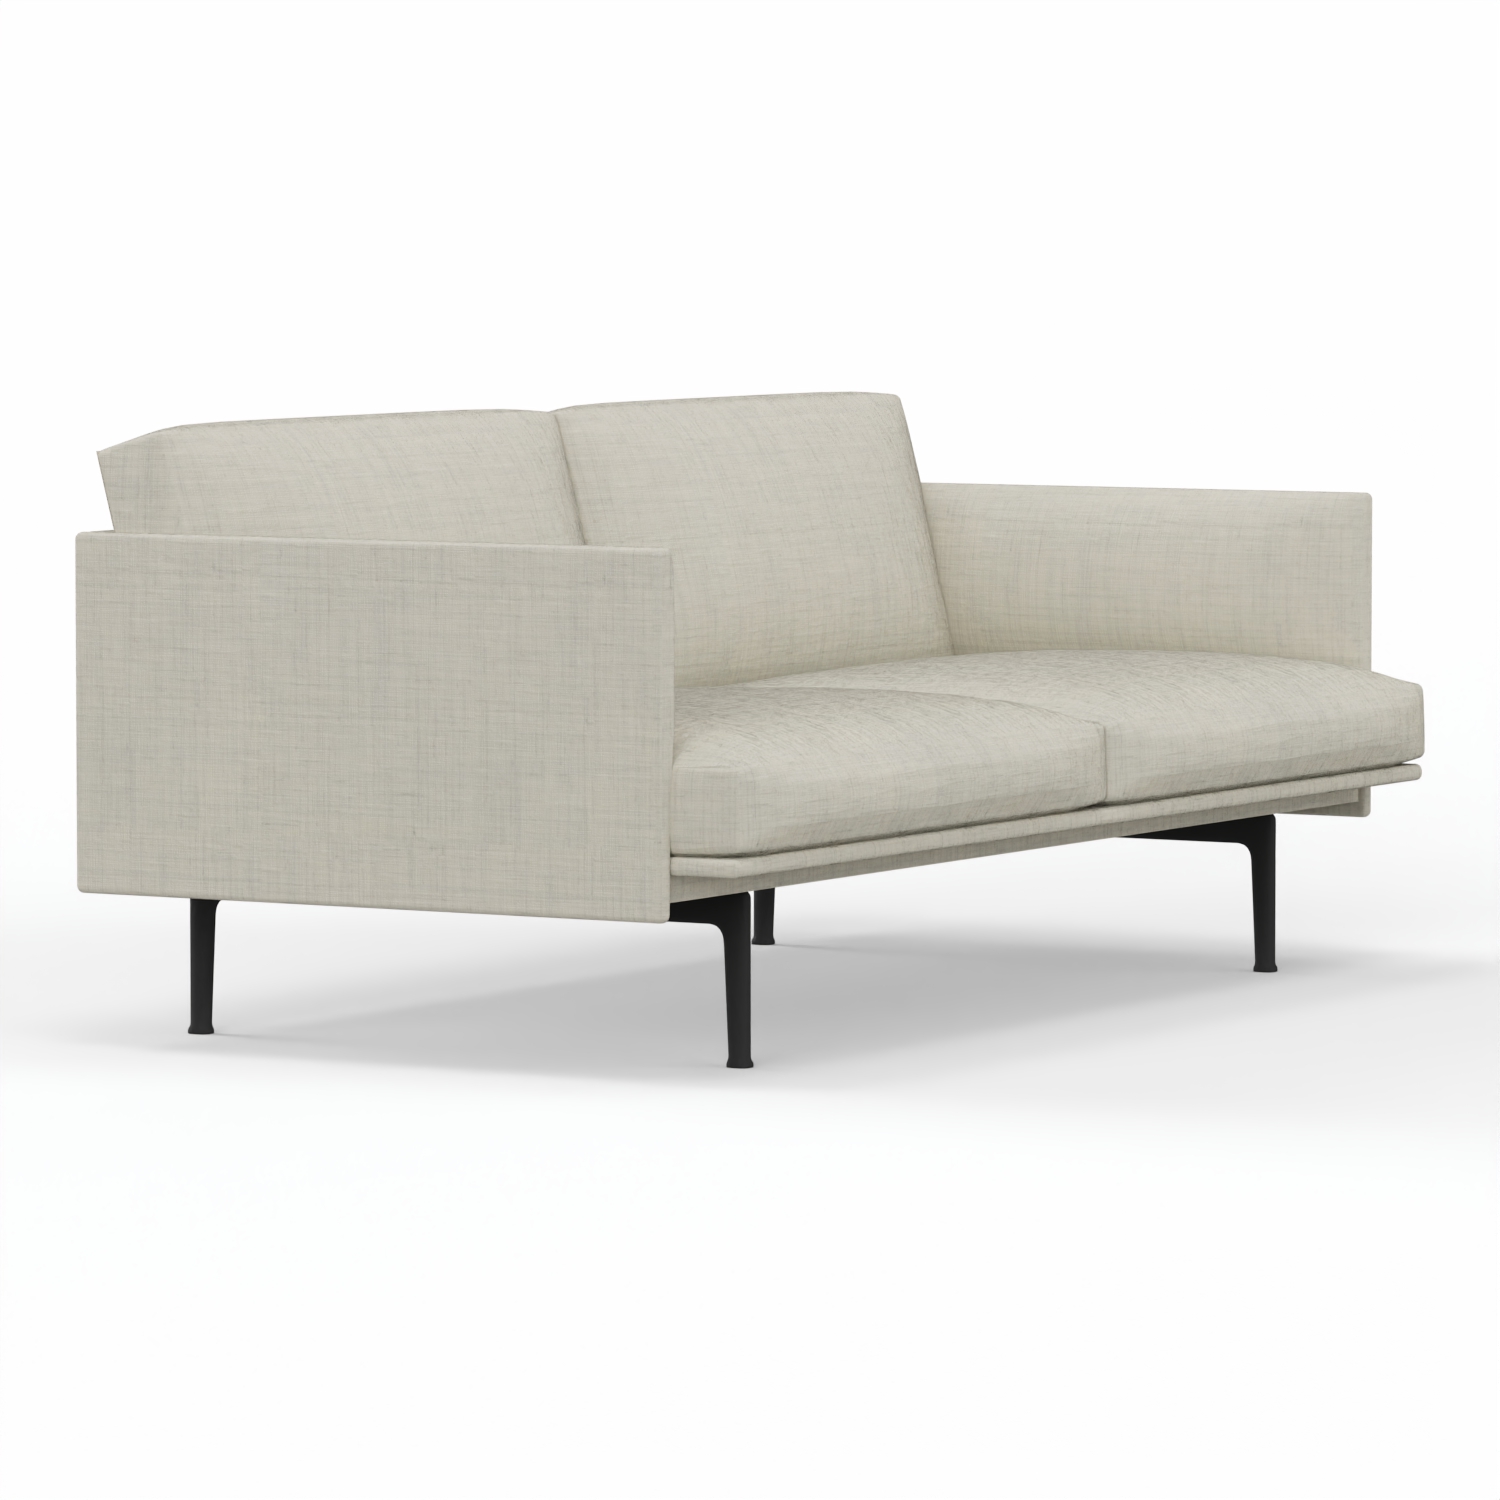 Outline Sofa / 2-SEATER 27008-113